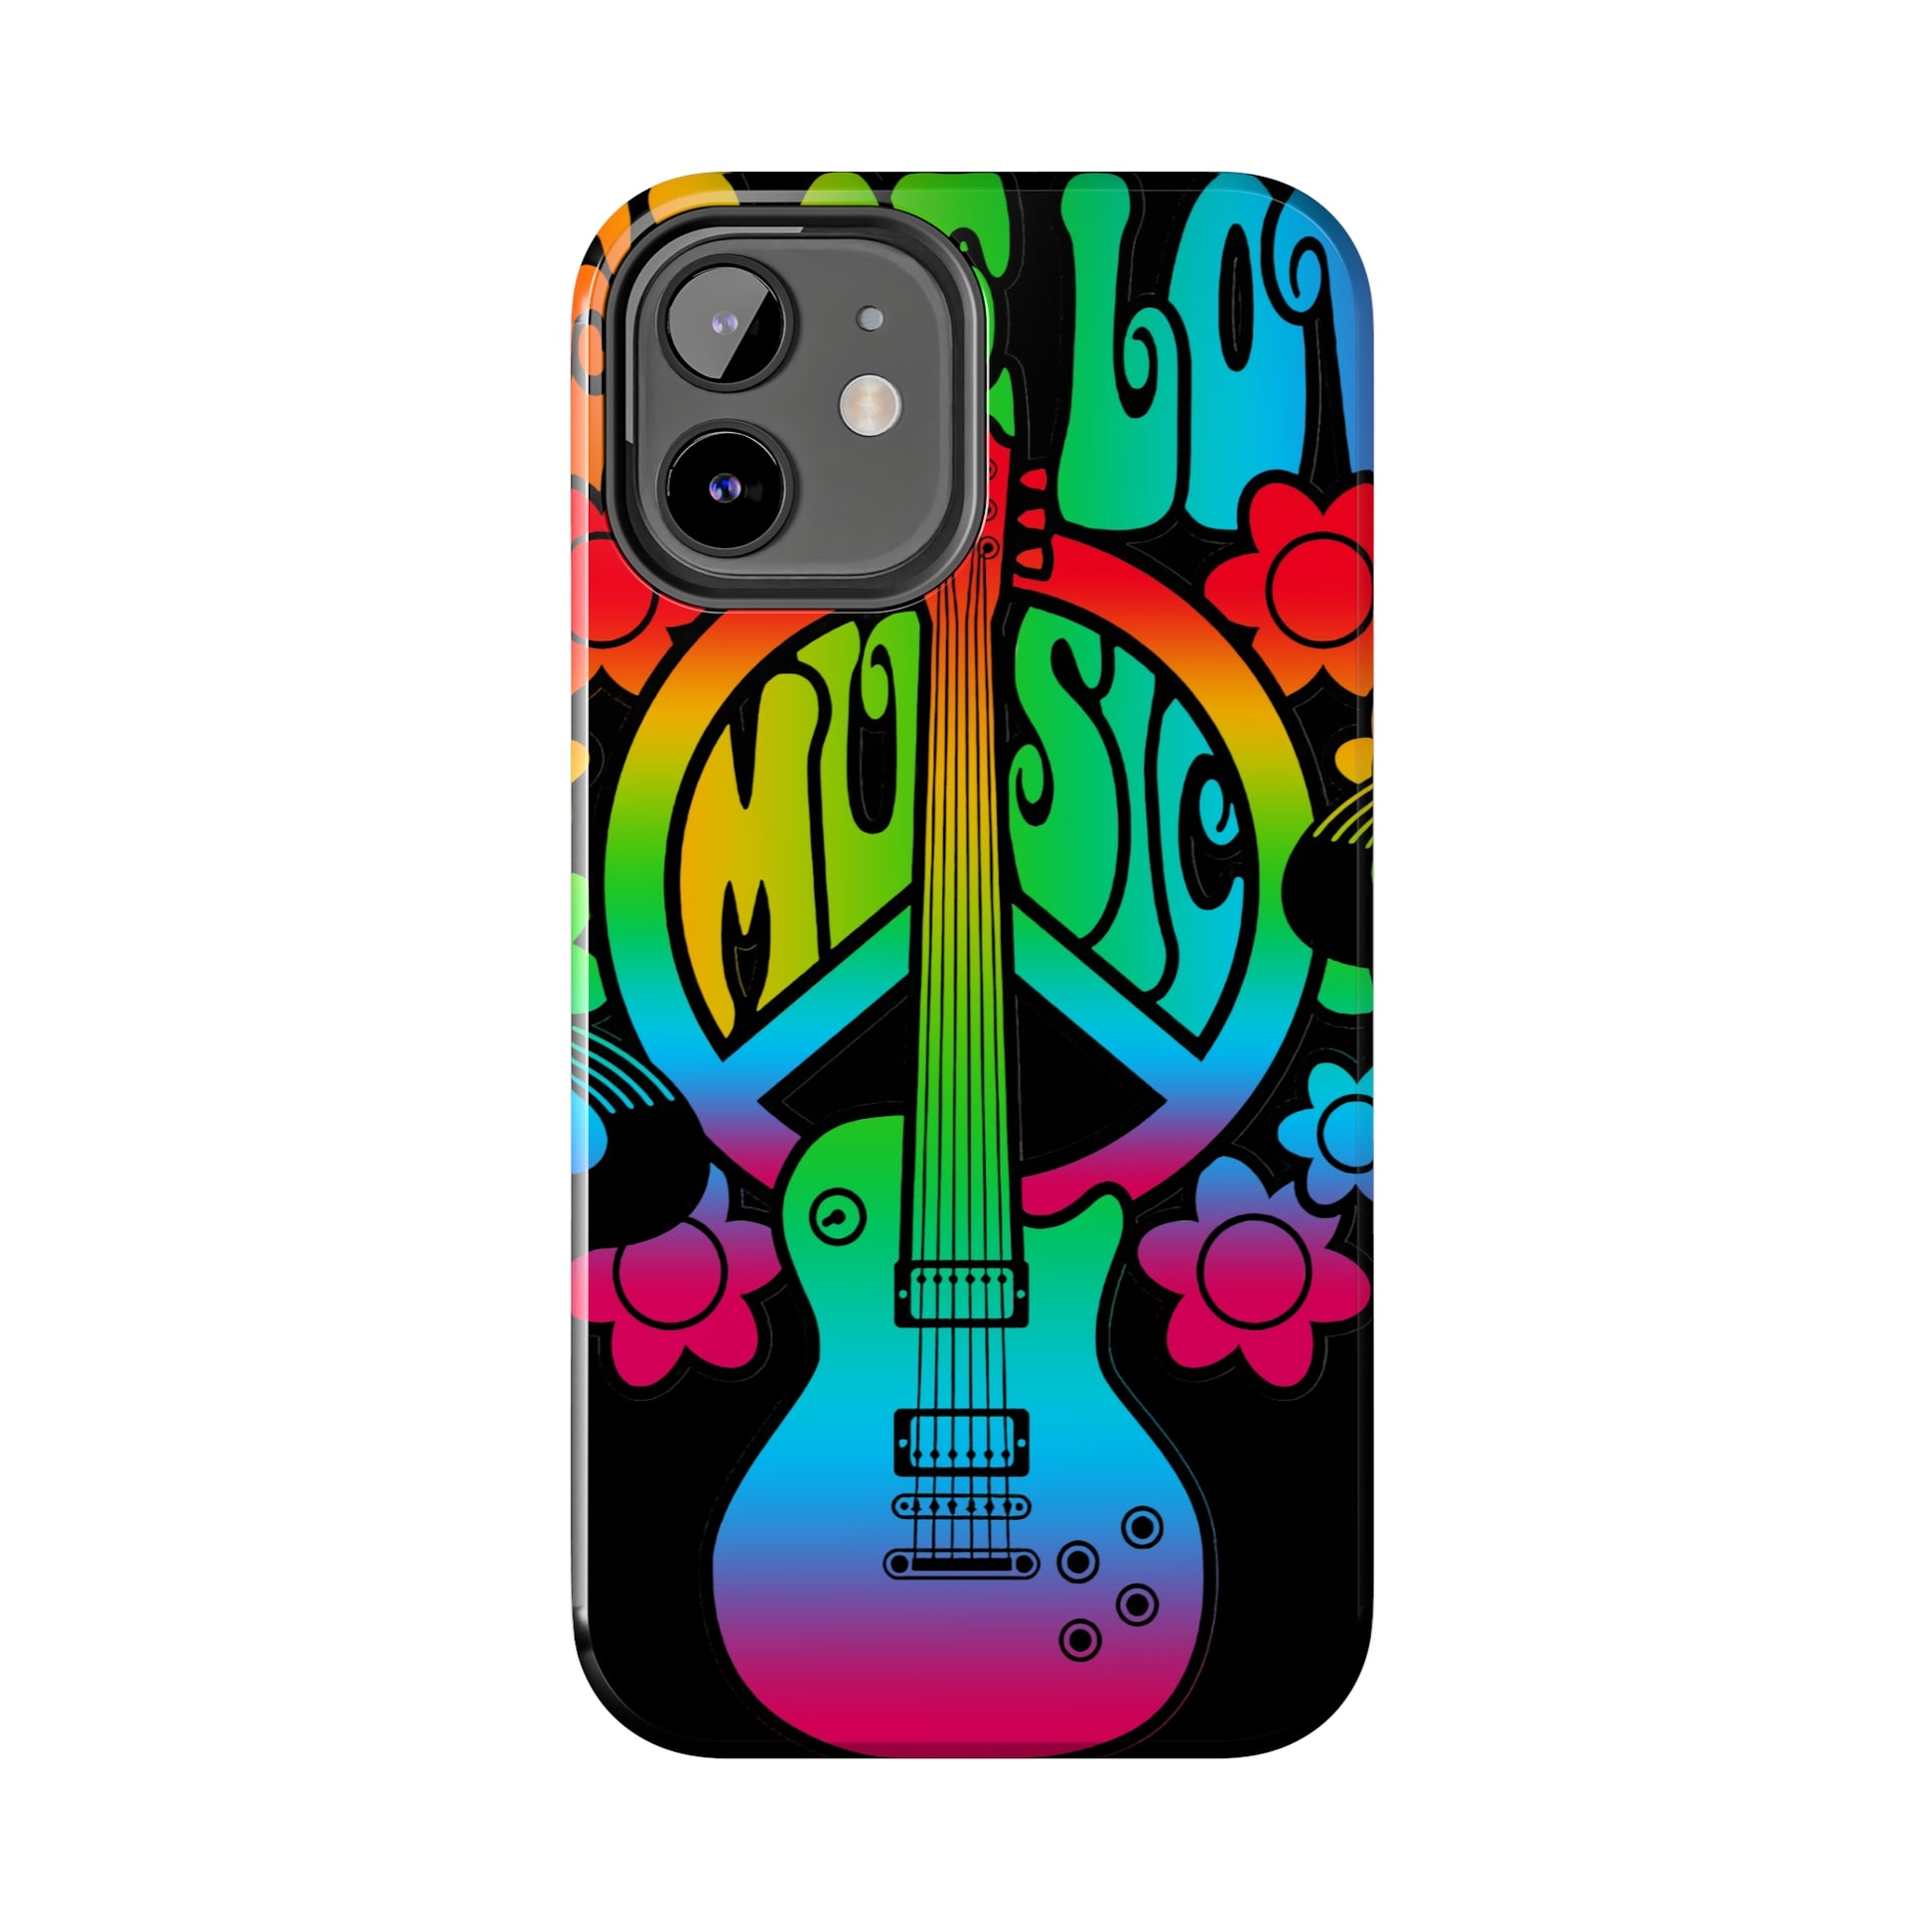 Peace Love and Music: iPhone Tough Case Design - Wireless Charging - Superior Protection - Original Designs by TheGlassyLass.com